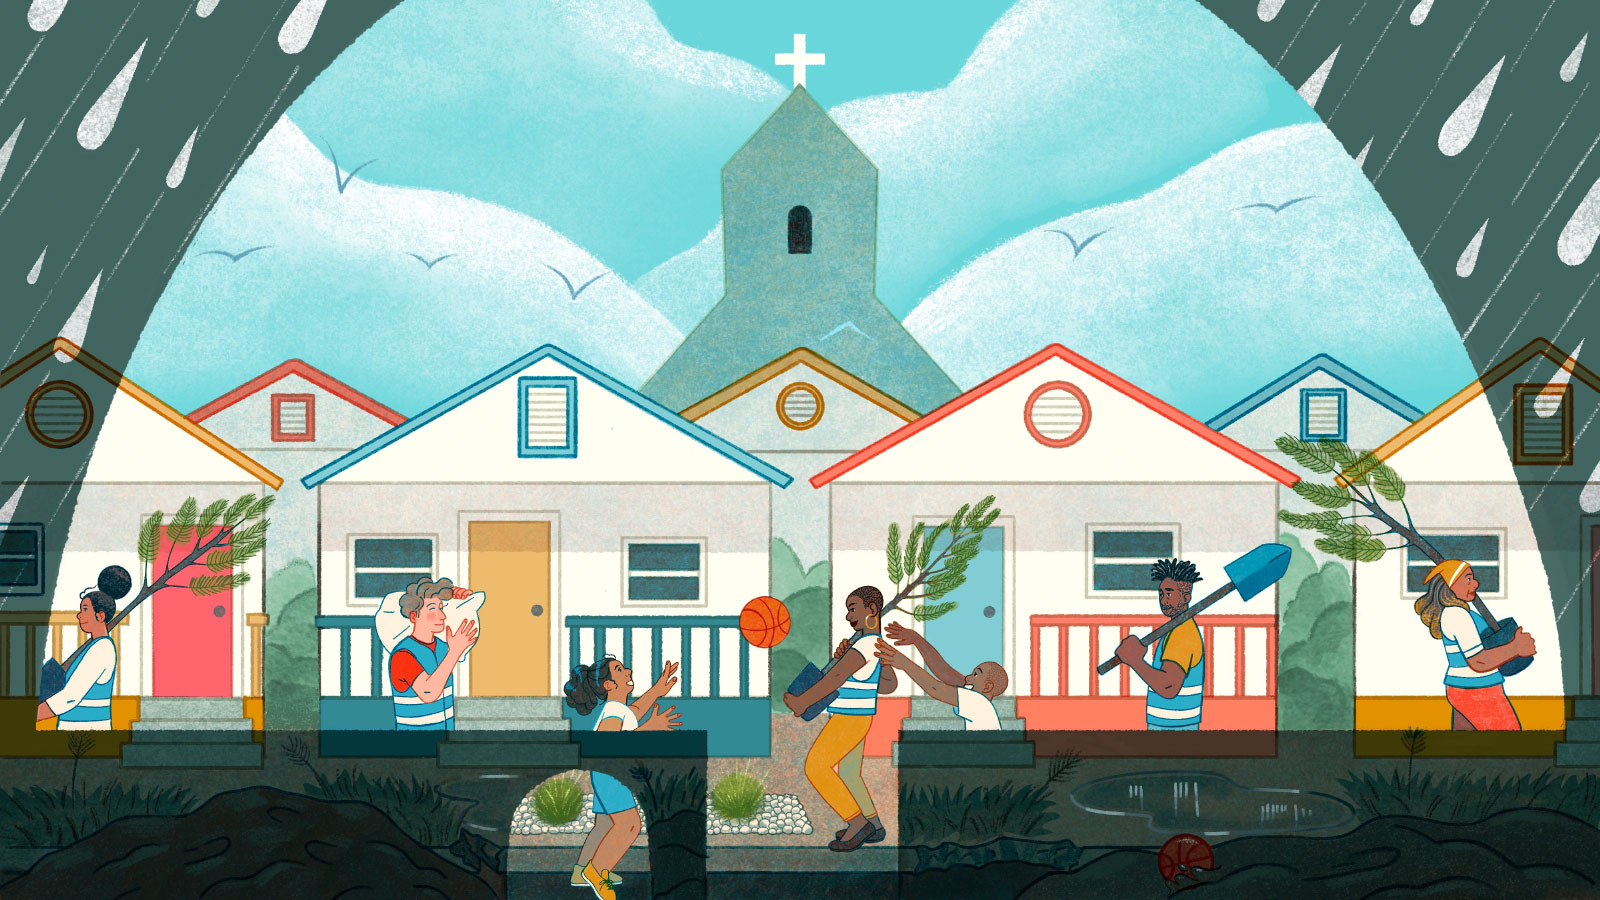 Illustration: Various people carrying trees, shovels, and bags on a sidewalk in front of rows of white houses with bright trim colors, a church steeple rising into a cloudy blue sky behind them. The illustration is framed by a dark overlay with raindrops at the top, and flooded streets at the bottom.